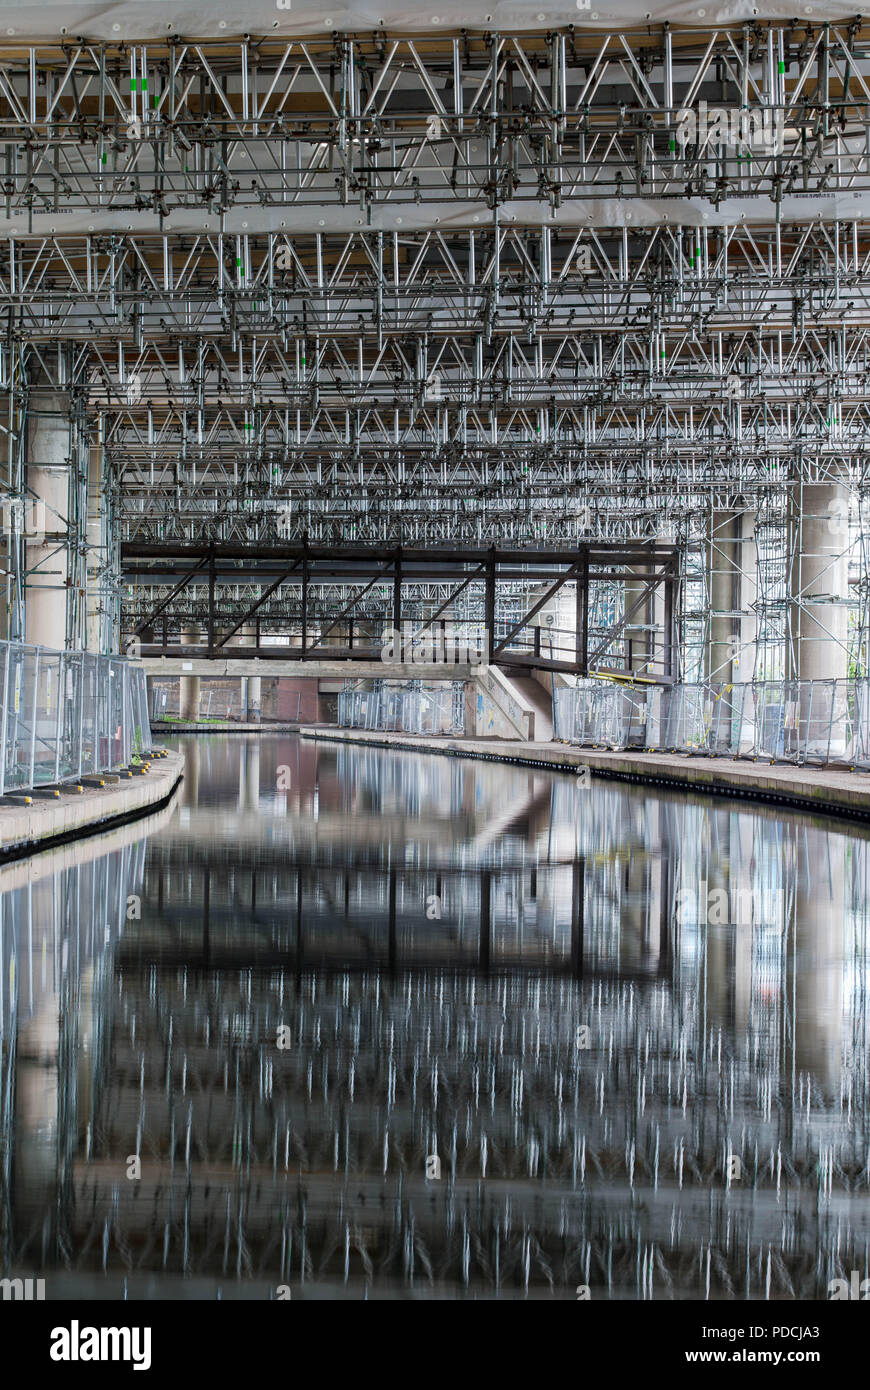 Oldbury, West Midlands, UK. 9th August, 2018. A two-year repair project on the elevated section of the M5 motorway passes its halfway mark. Scaffolding is reflected in the canal. At more than £100 million, M5 Oldbury is believed to be the largest concrete repair project, by value, ever carried out in Britain. Already more than 5,000 separate repairs have been carried out on the southbound carriageway, 3,500 more than anticipated. The Oldbury viaduct carries 120,000 vehicles a day on one of Europe's busiest motorways, and vehicles are limited to 30mph. Peter Lopeman/Alamy Live News Stock Photo